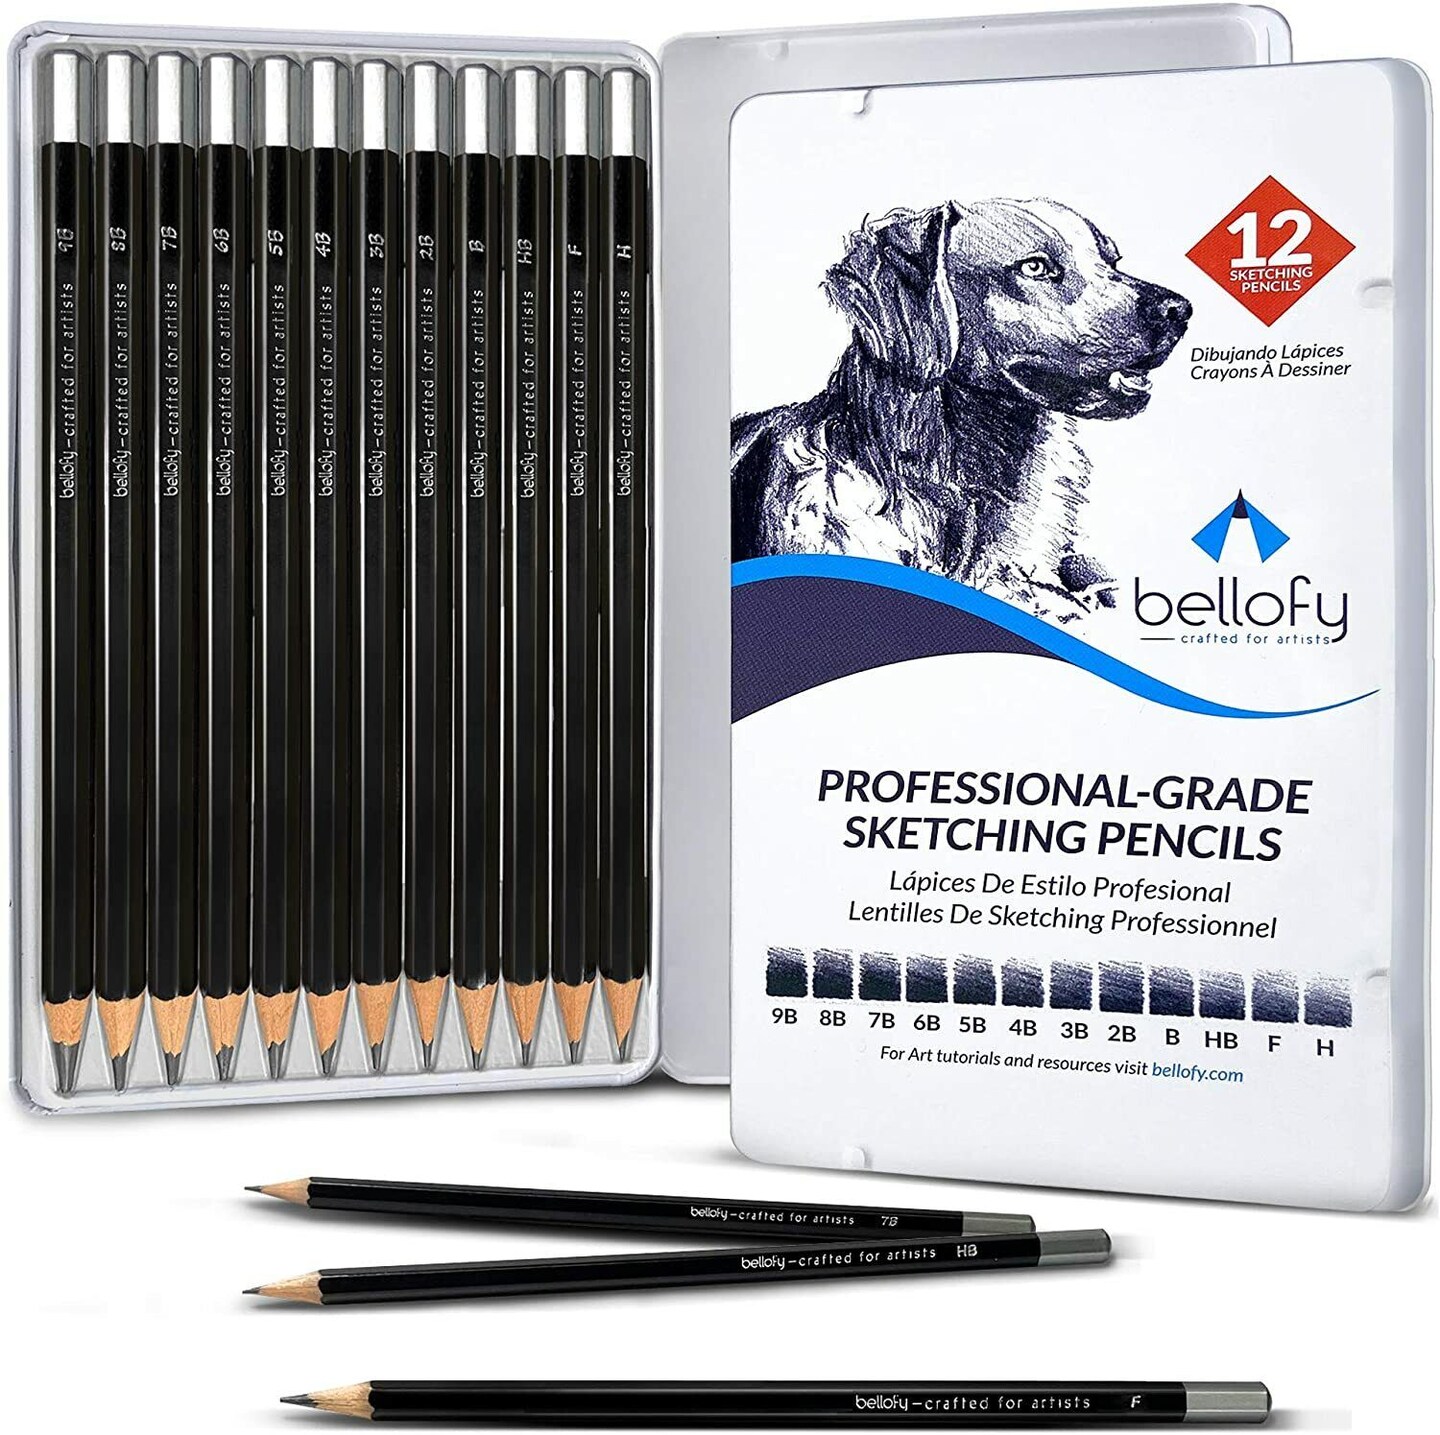  Qionew Sketch Pencils for Drawing,12 Pack Drawing Pencils, Art  Pencils, Graphite Pencils, Art Pencils for Drawing and Shading, Sketching,  Artist Pencils for Beginners & Pro Artists : Arts, Crafts 